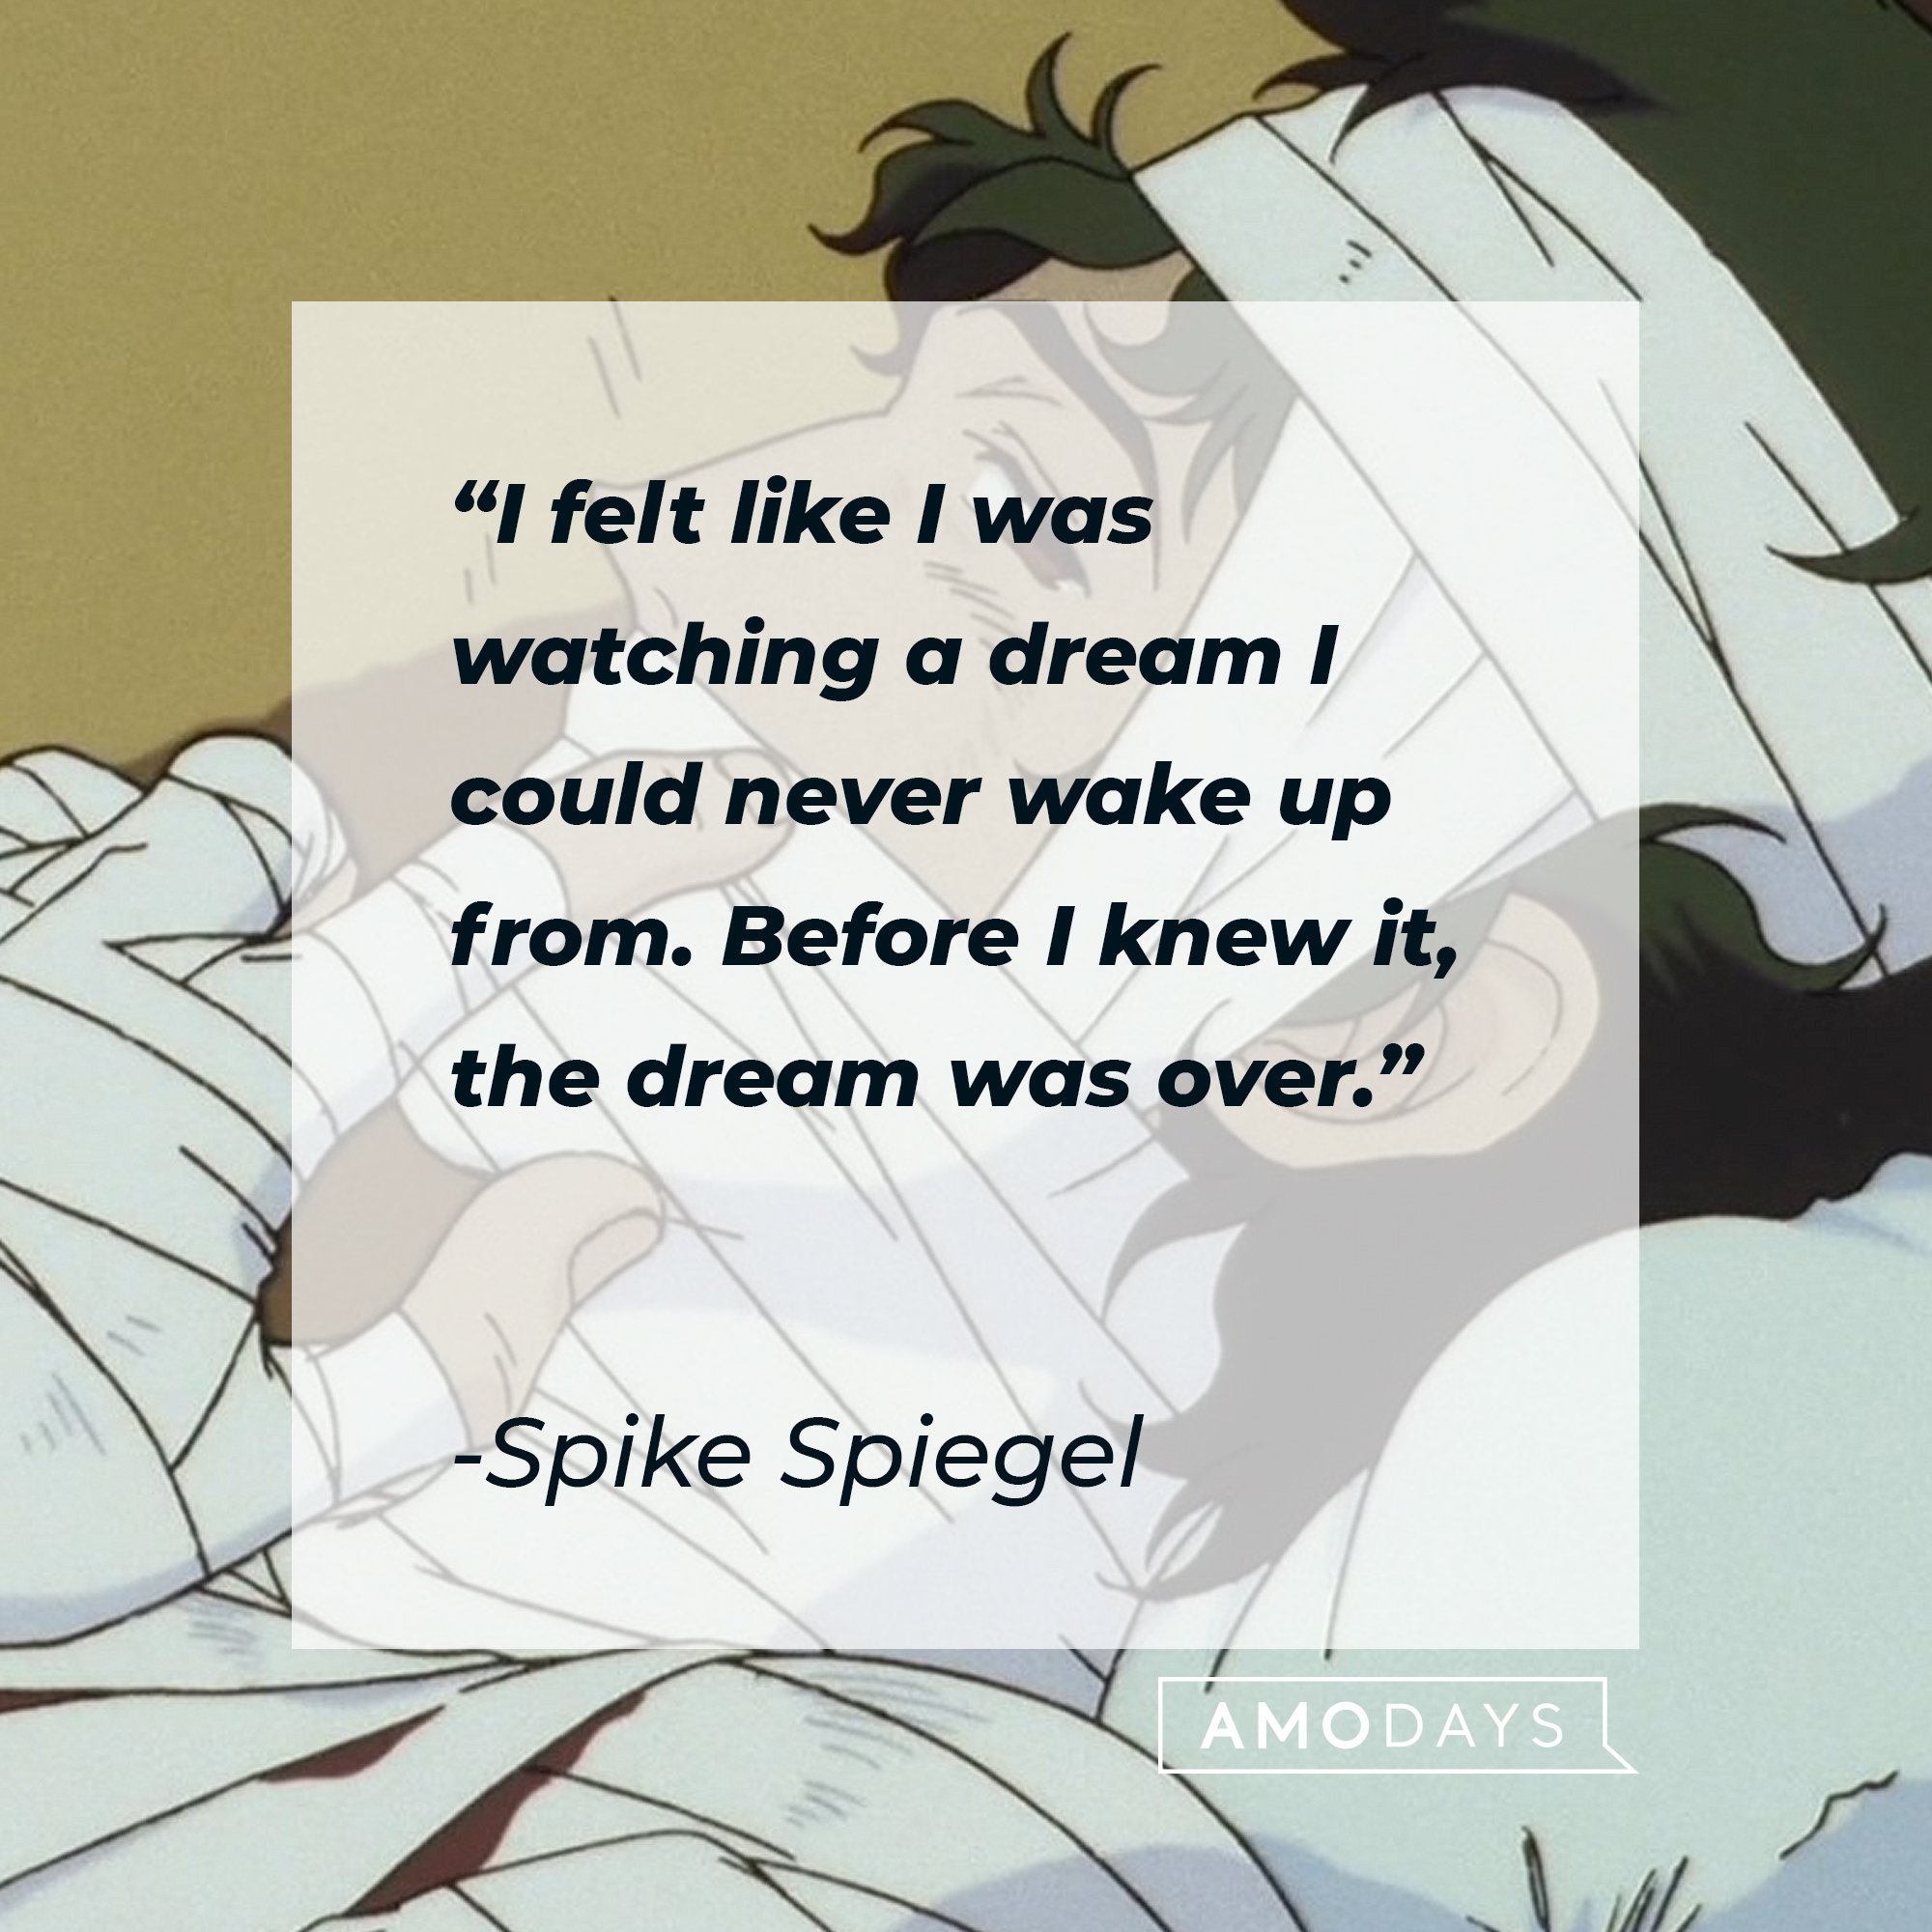 Spike Spiegel’s quote: "I felt like I was watching a dream I could never wake up from. Before I knew it, the dream was over." | Image: AmoDays 